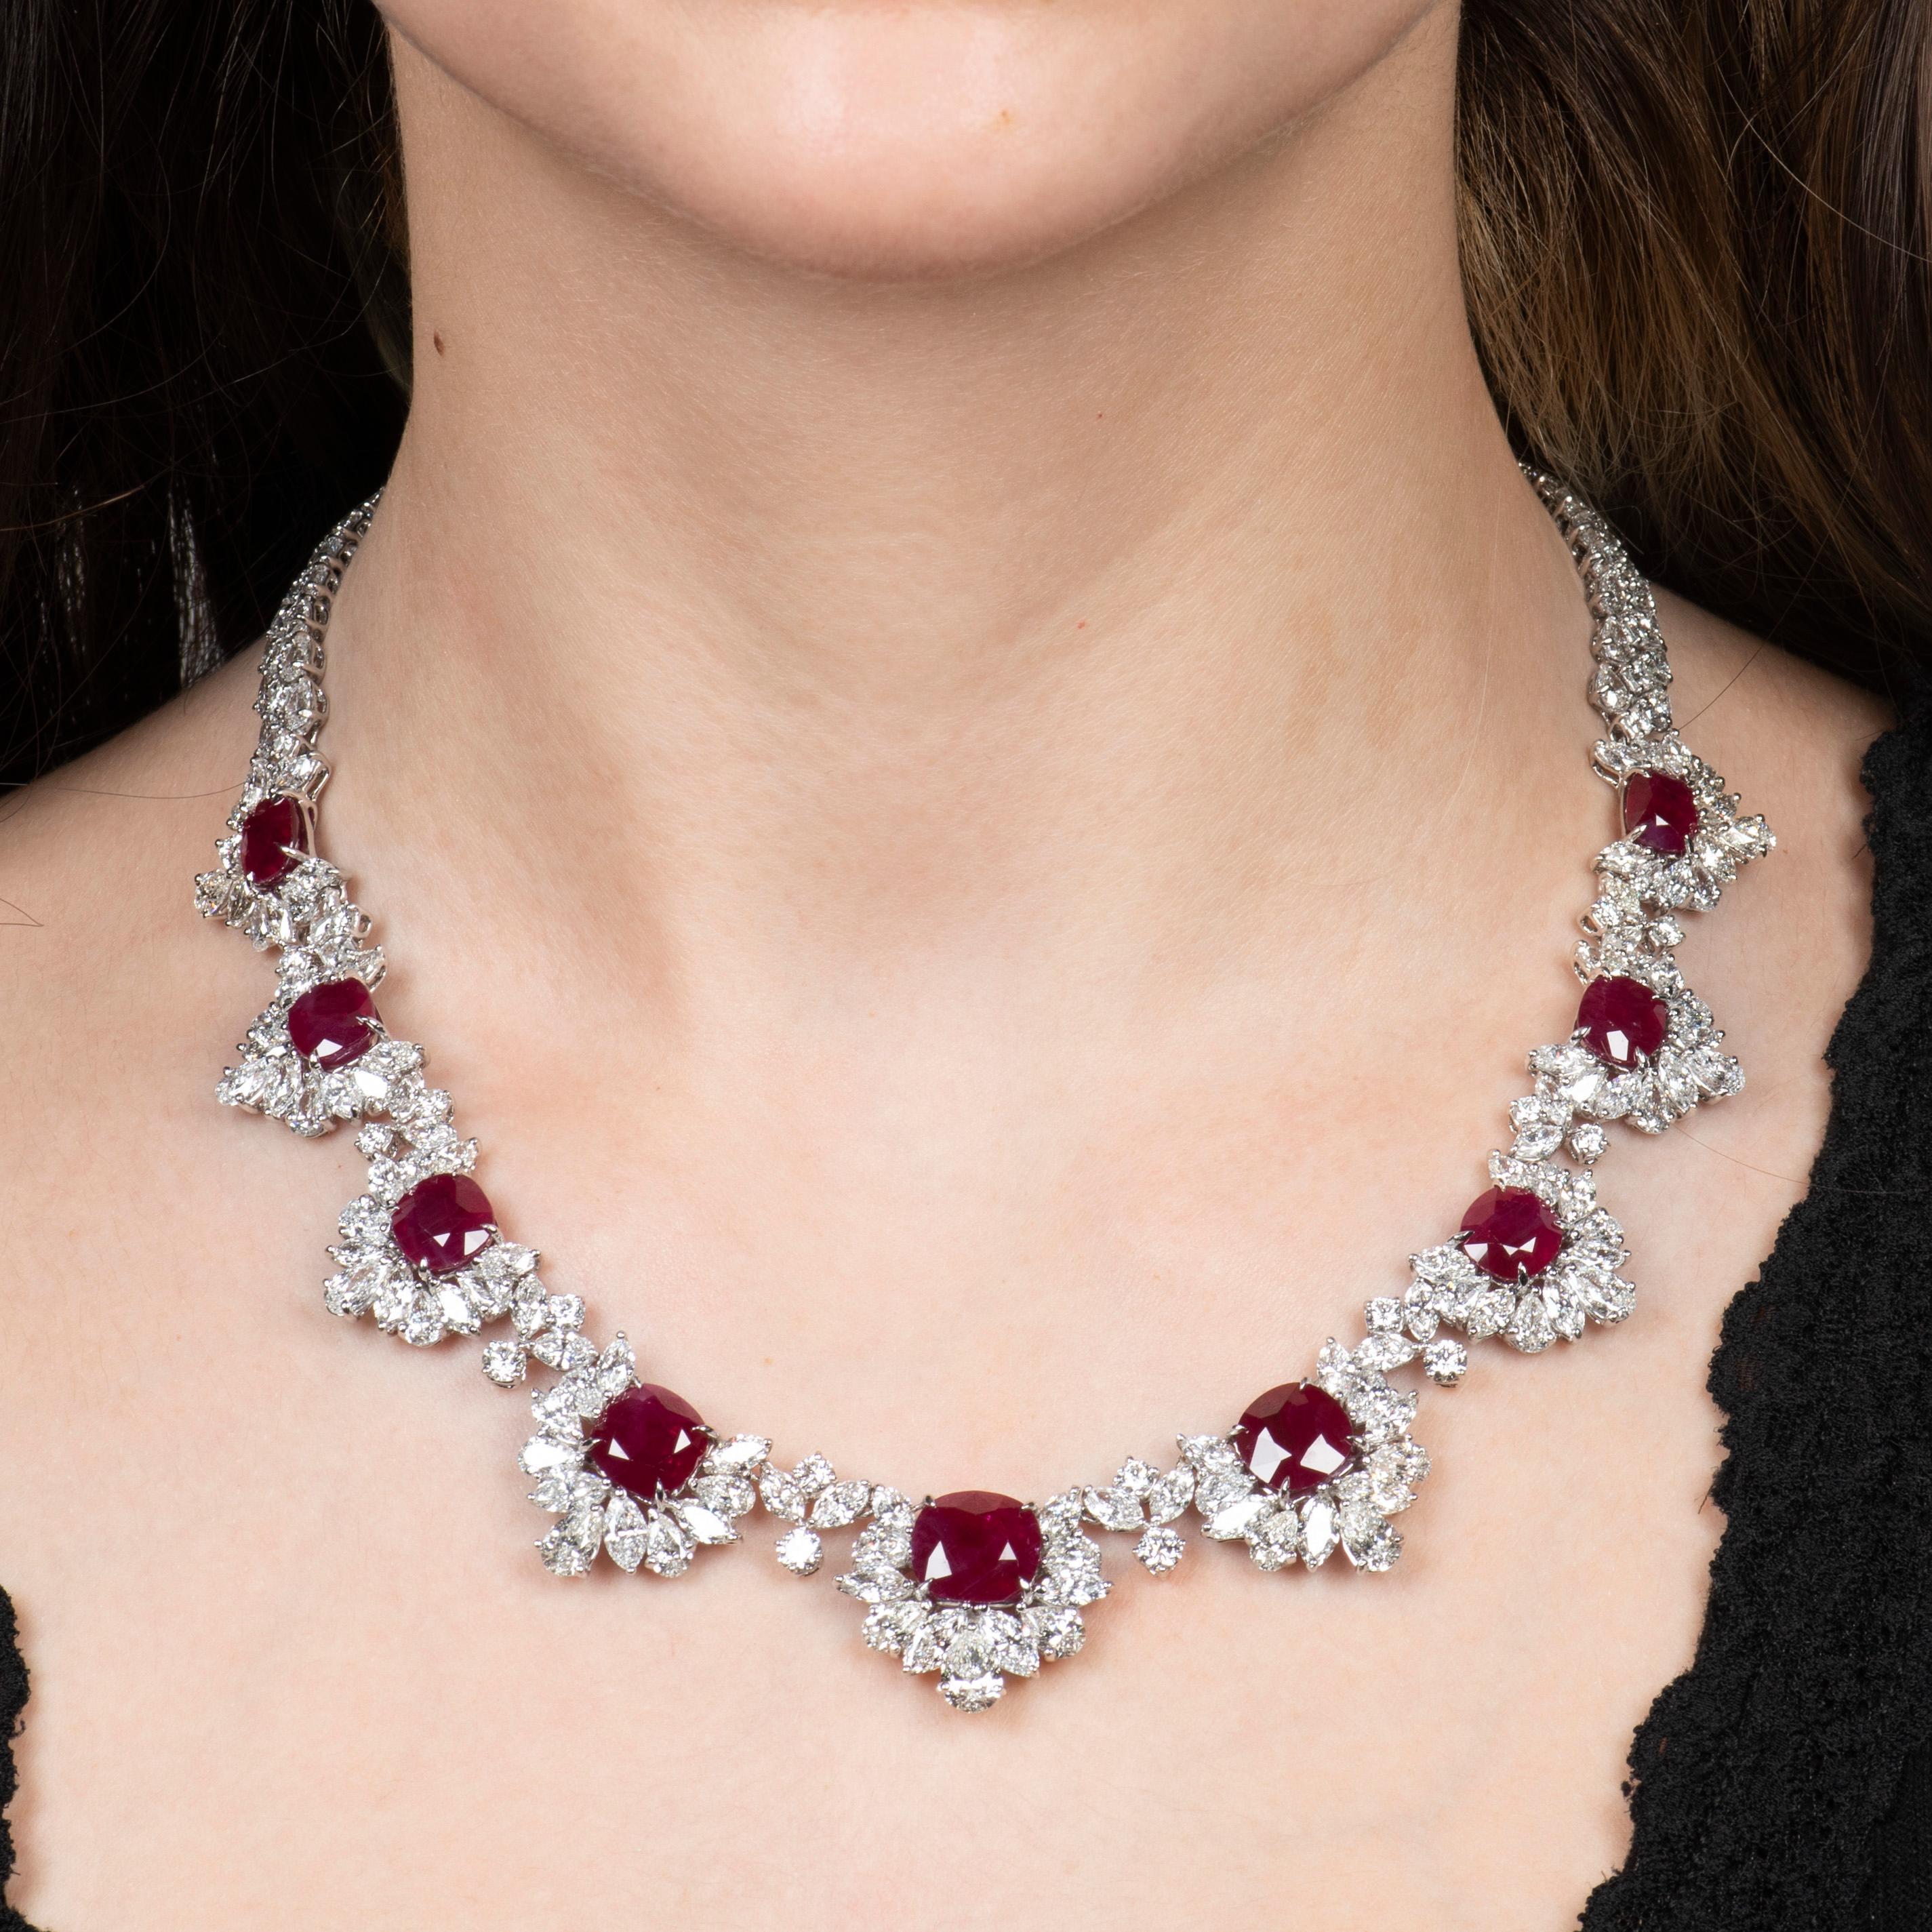 This luxurious necklace is one of the most exquisite pieces we have ever laid eyes on. With its 39.74ct total weight in pigeon's blood red, natural, cushion cut Burma rubies and its 49.56ct total weight in diamonds, surrounding the rubies and